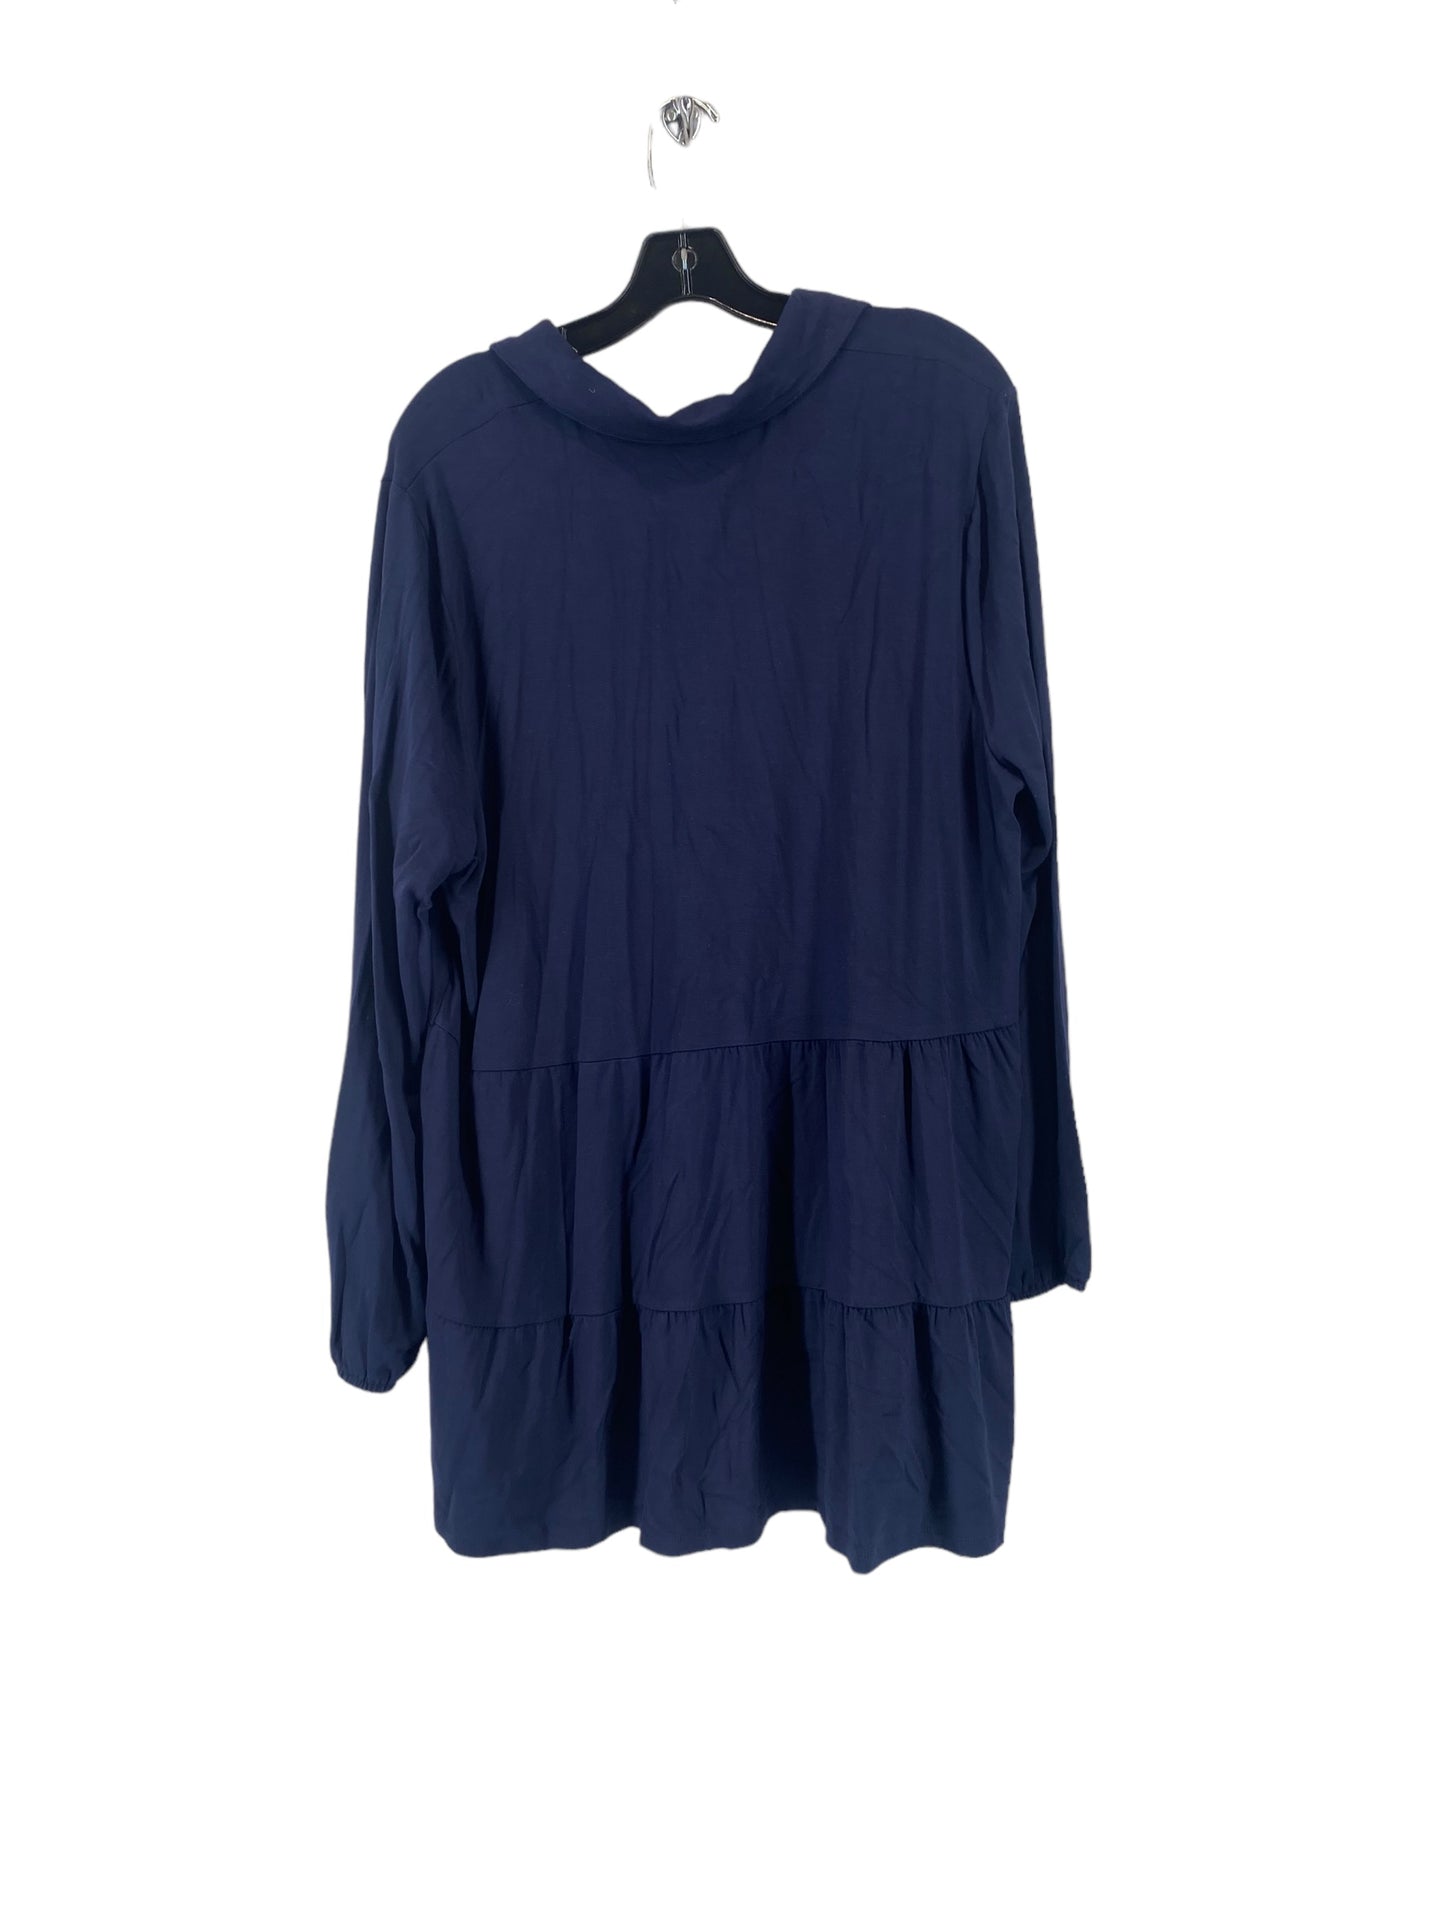 Navy Tunic 3/4 Sleeve New Directions, Size 1x